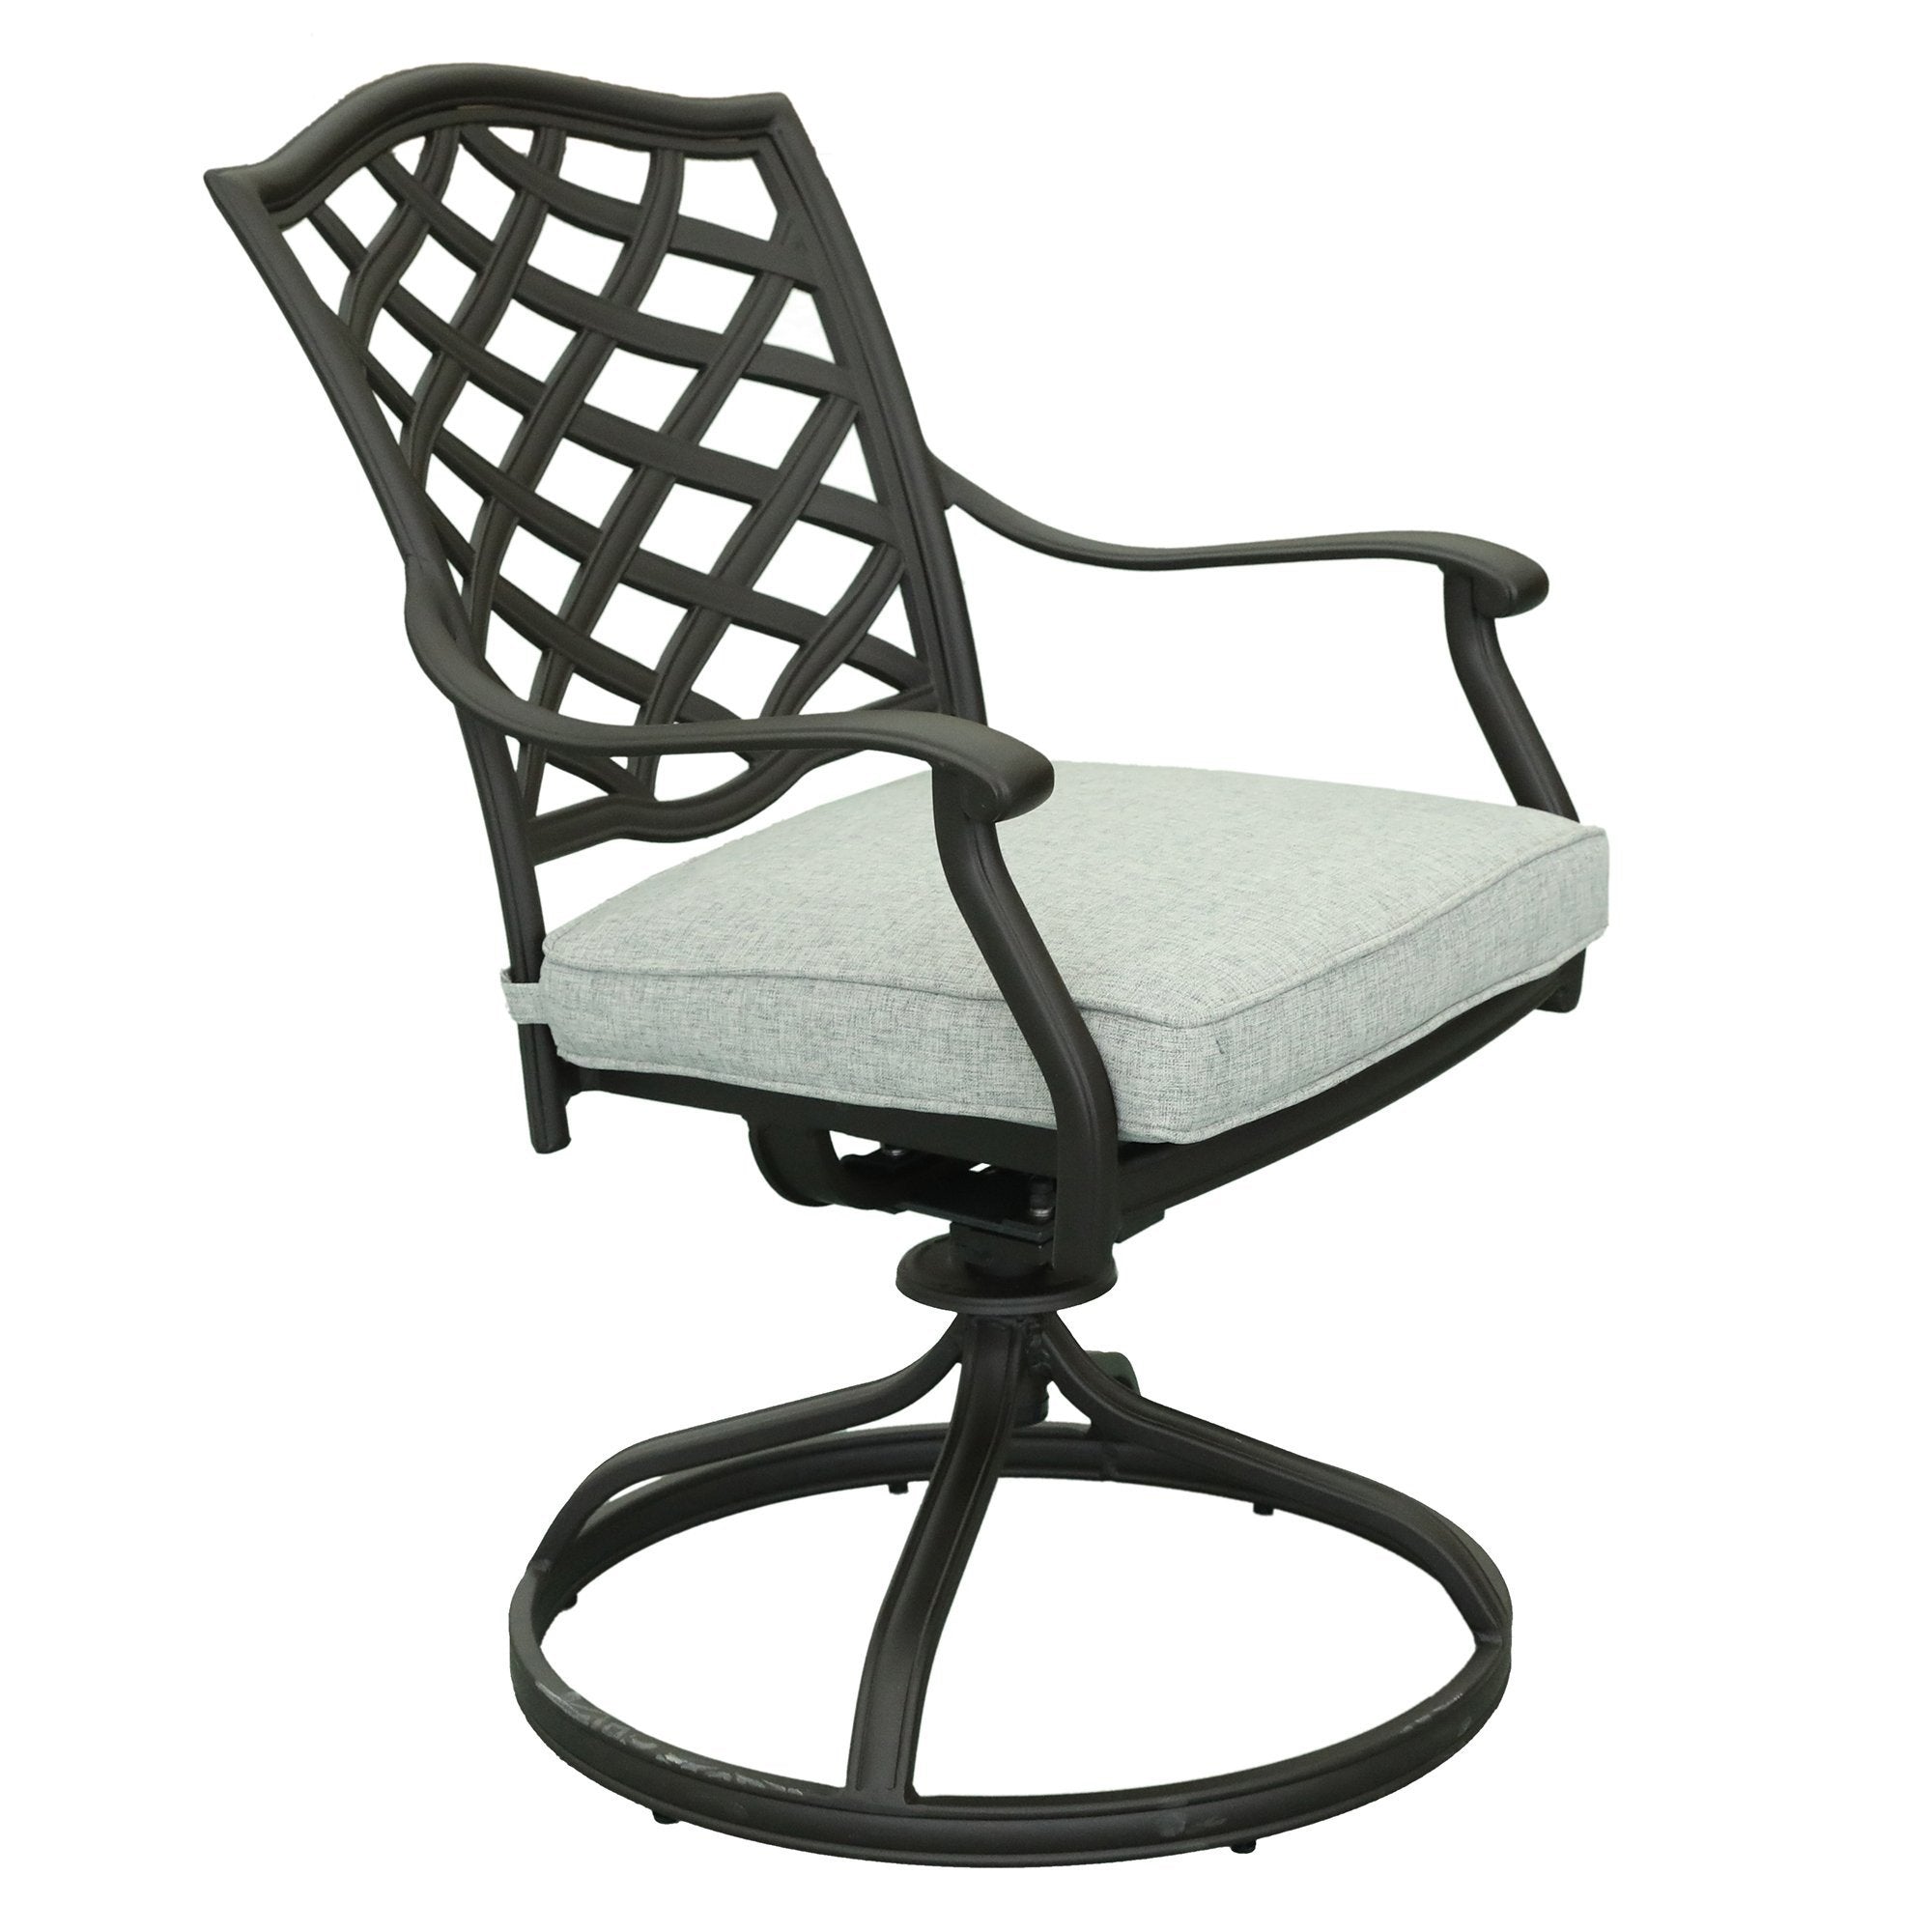 Outdoor Cast Aluminum Dining Swivel Chair With Cushion(Set of 2)-Boyel Living